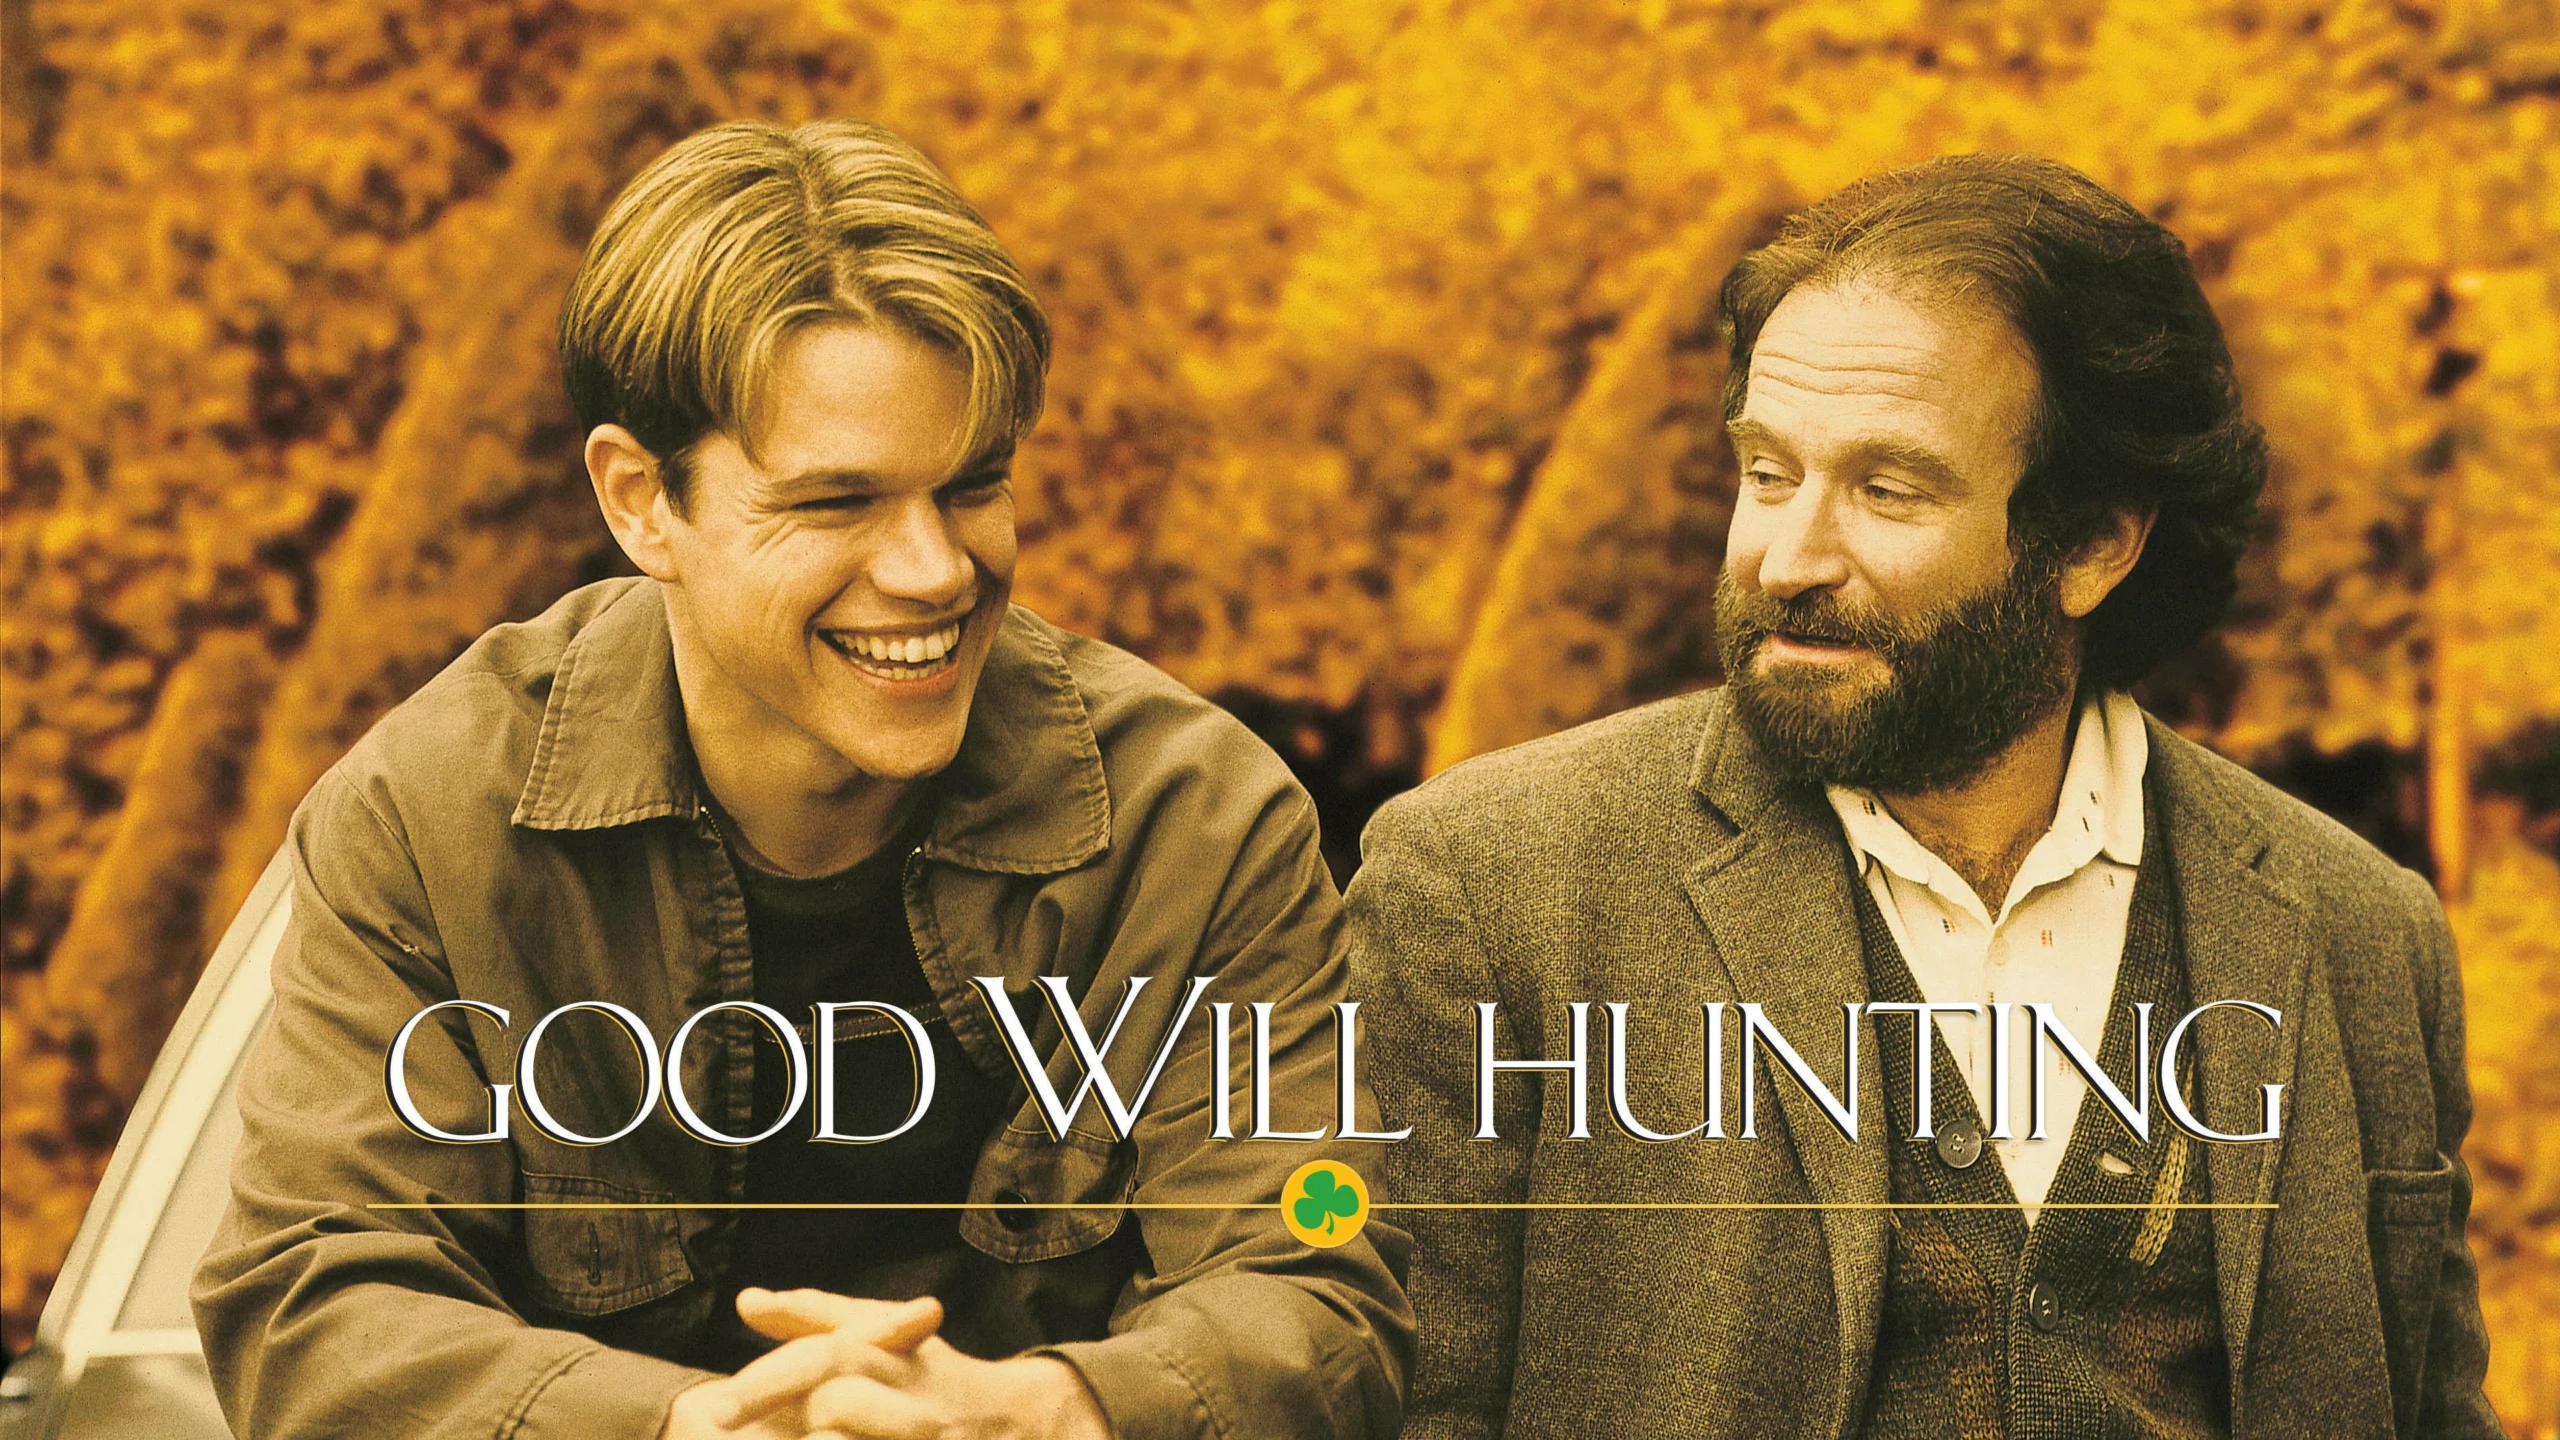 Good Will Hunting Cast (1997): Full List of Characters & Actors